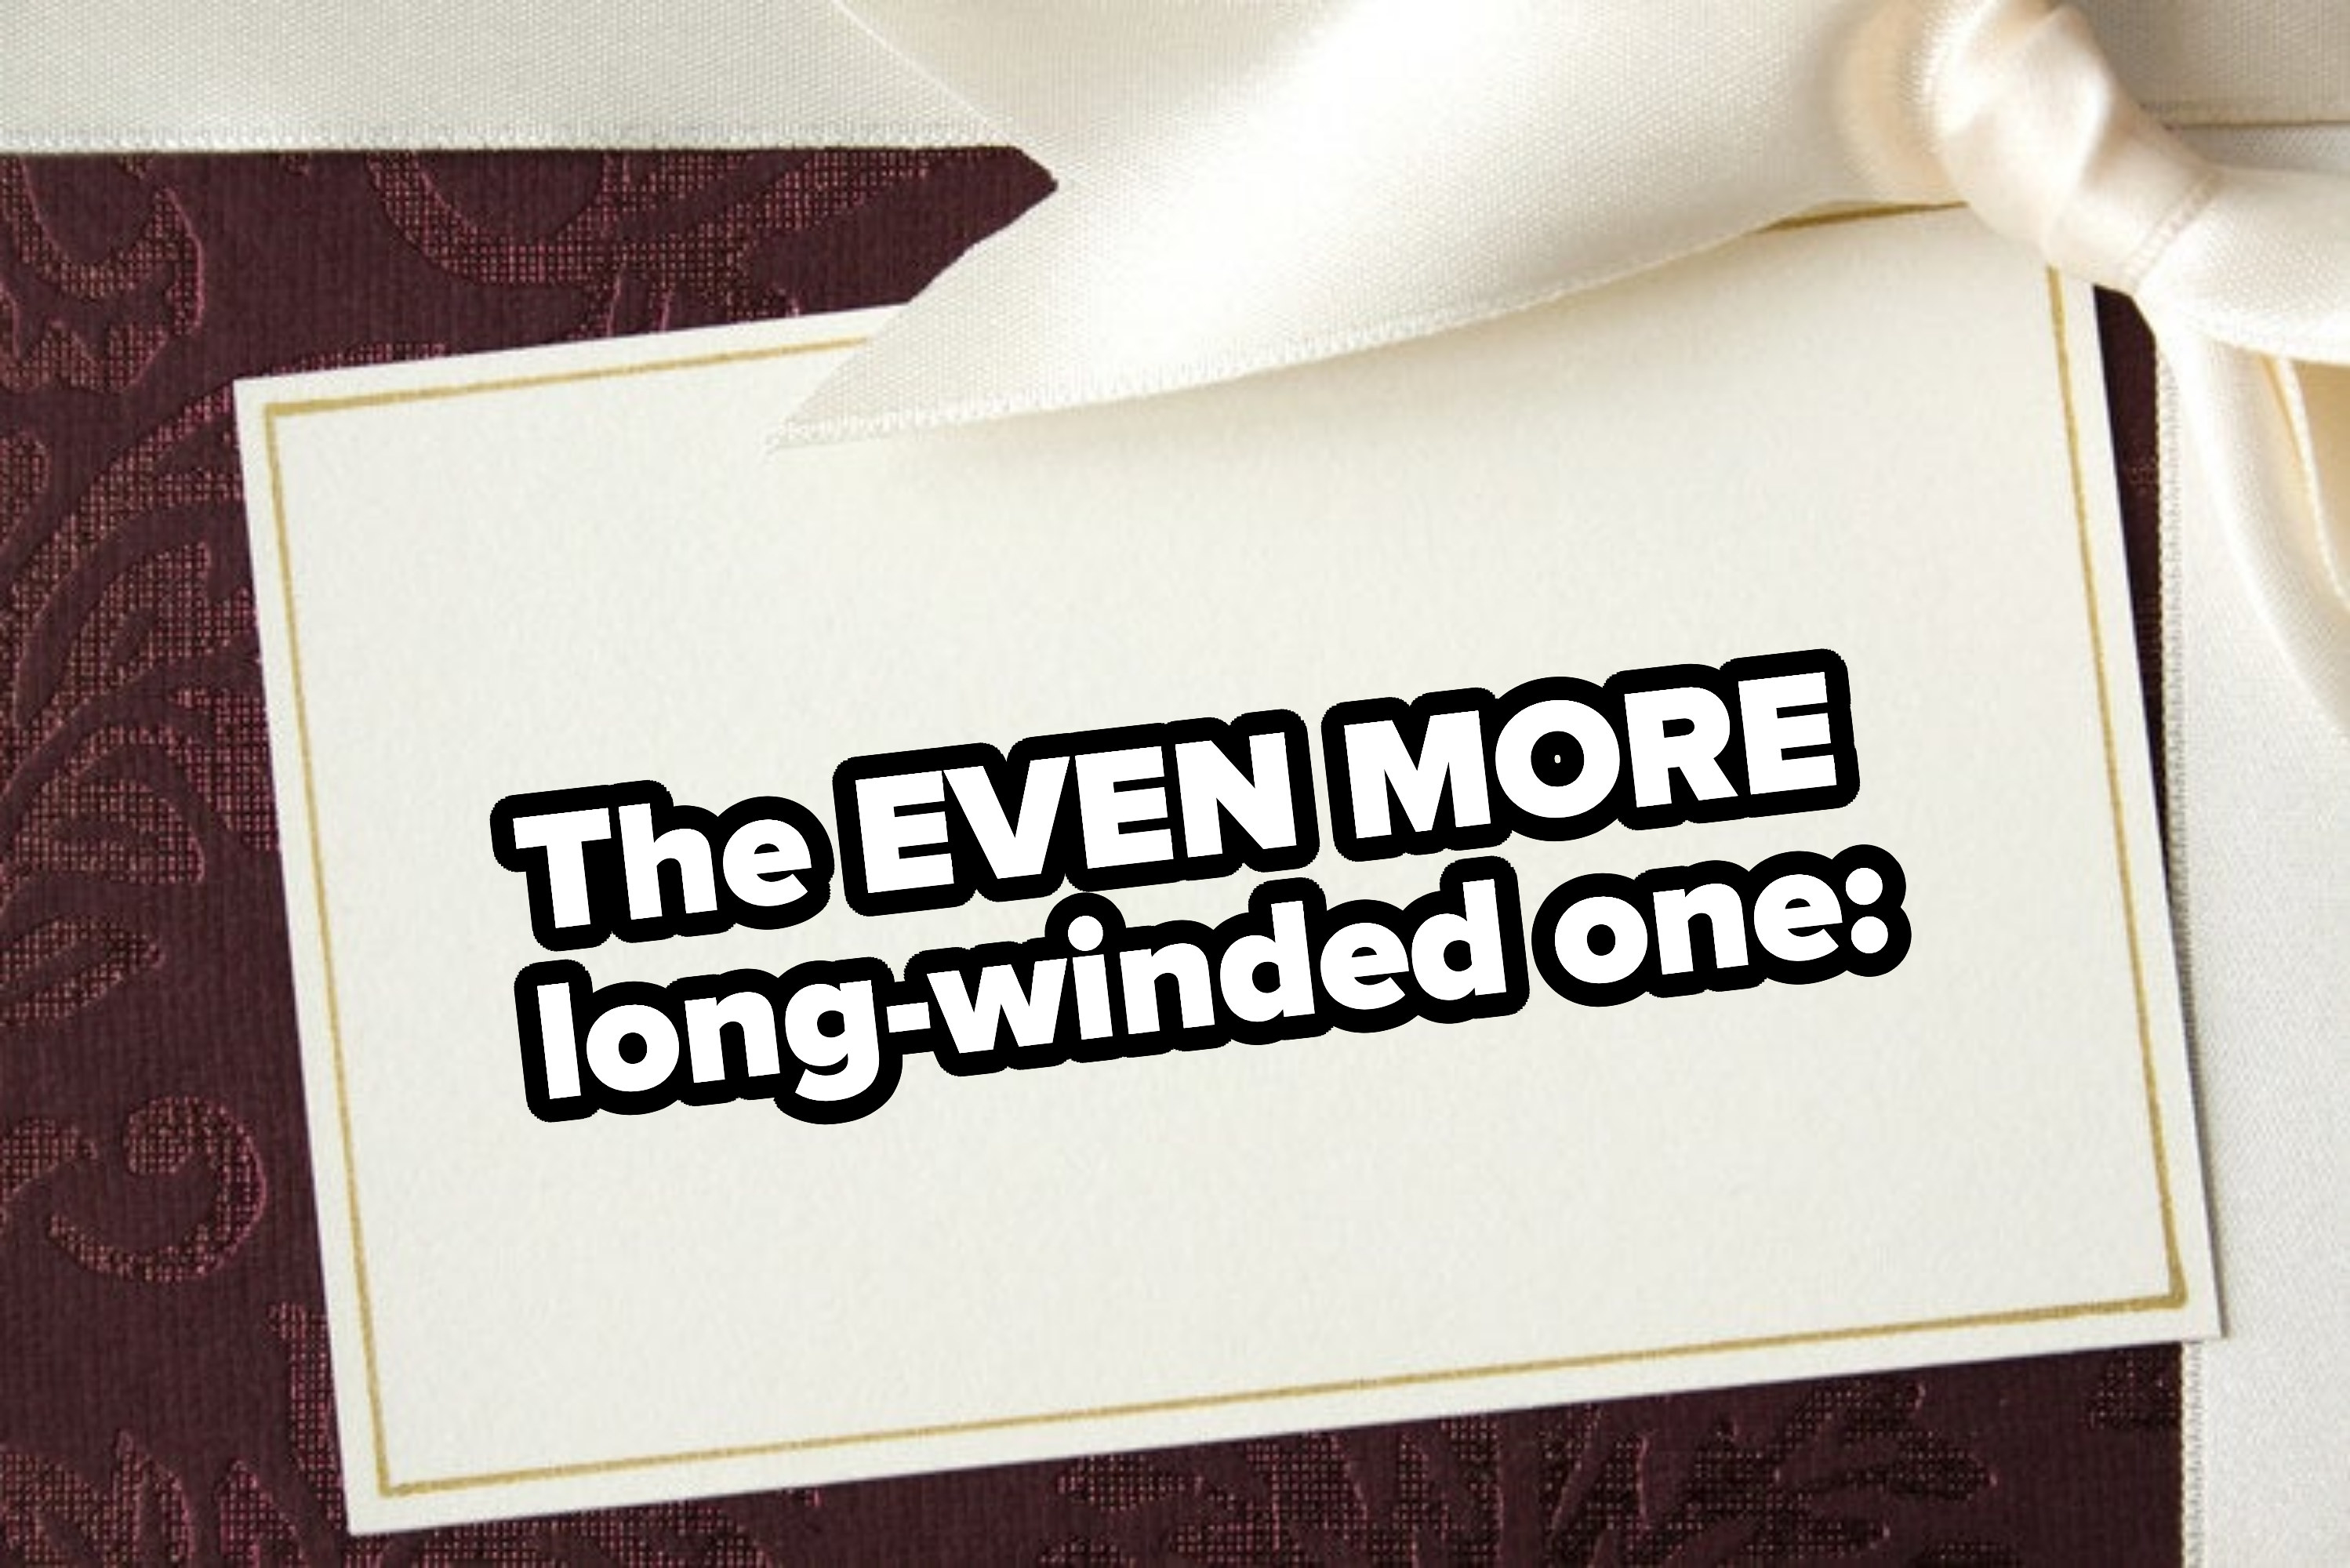 &quot;The EVEN MORE long-winded one&quot;